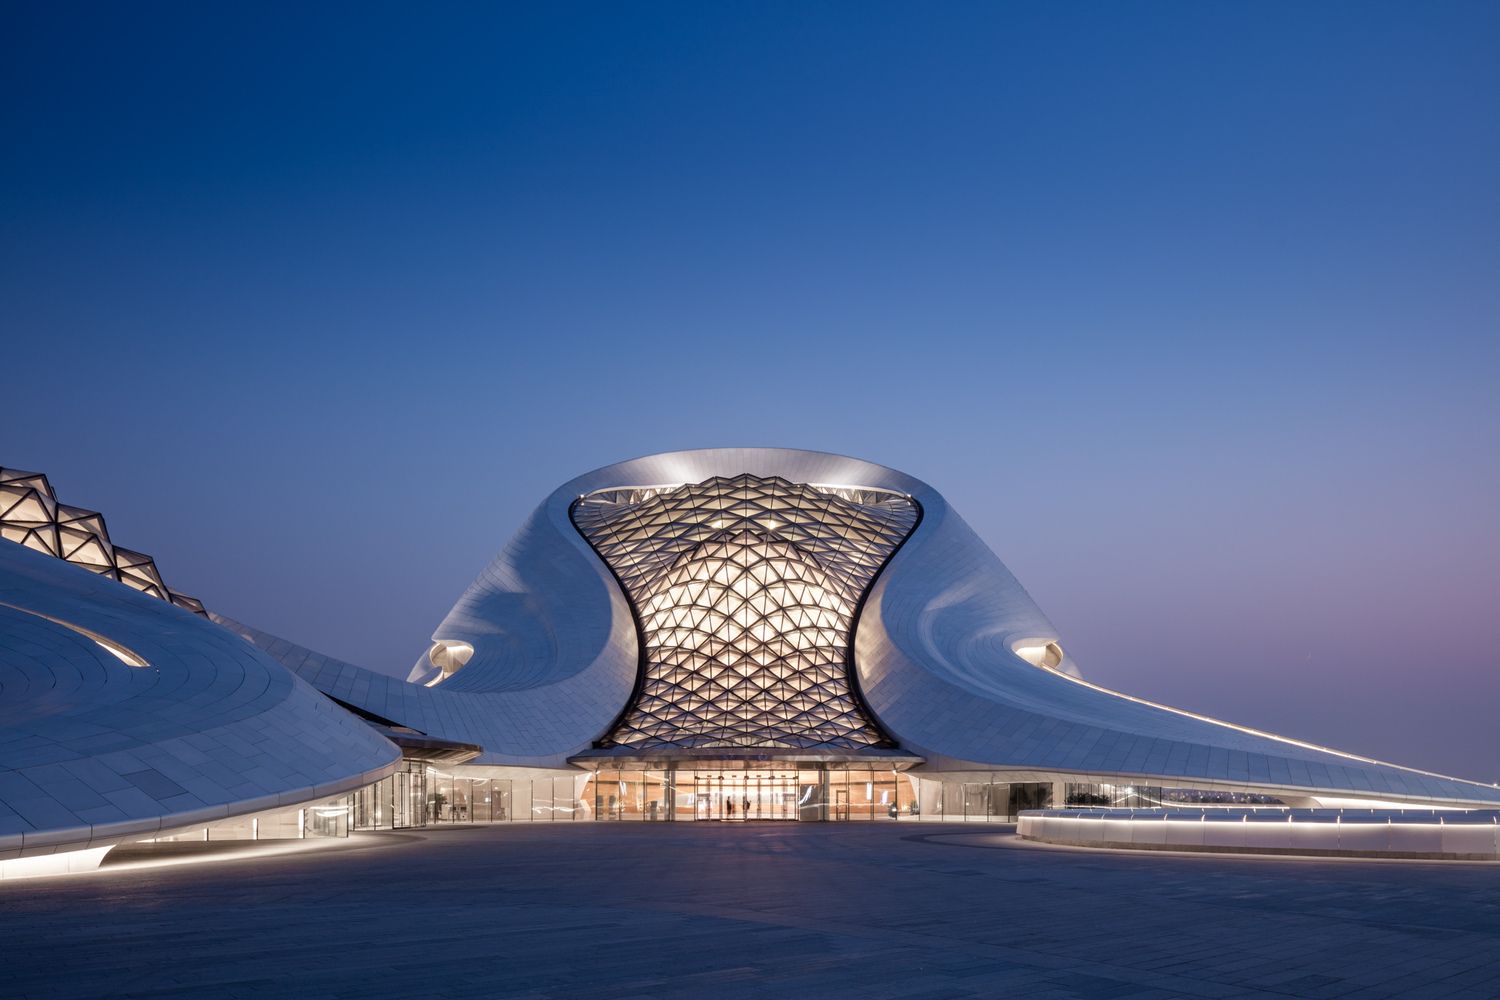 Harbin Opera House, designed by MAD Architects